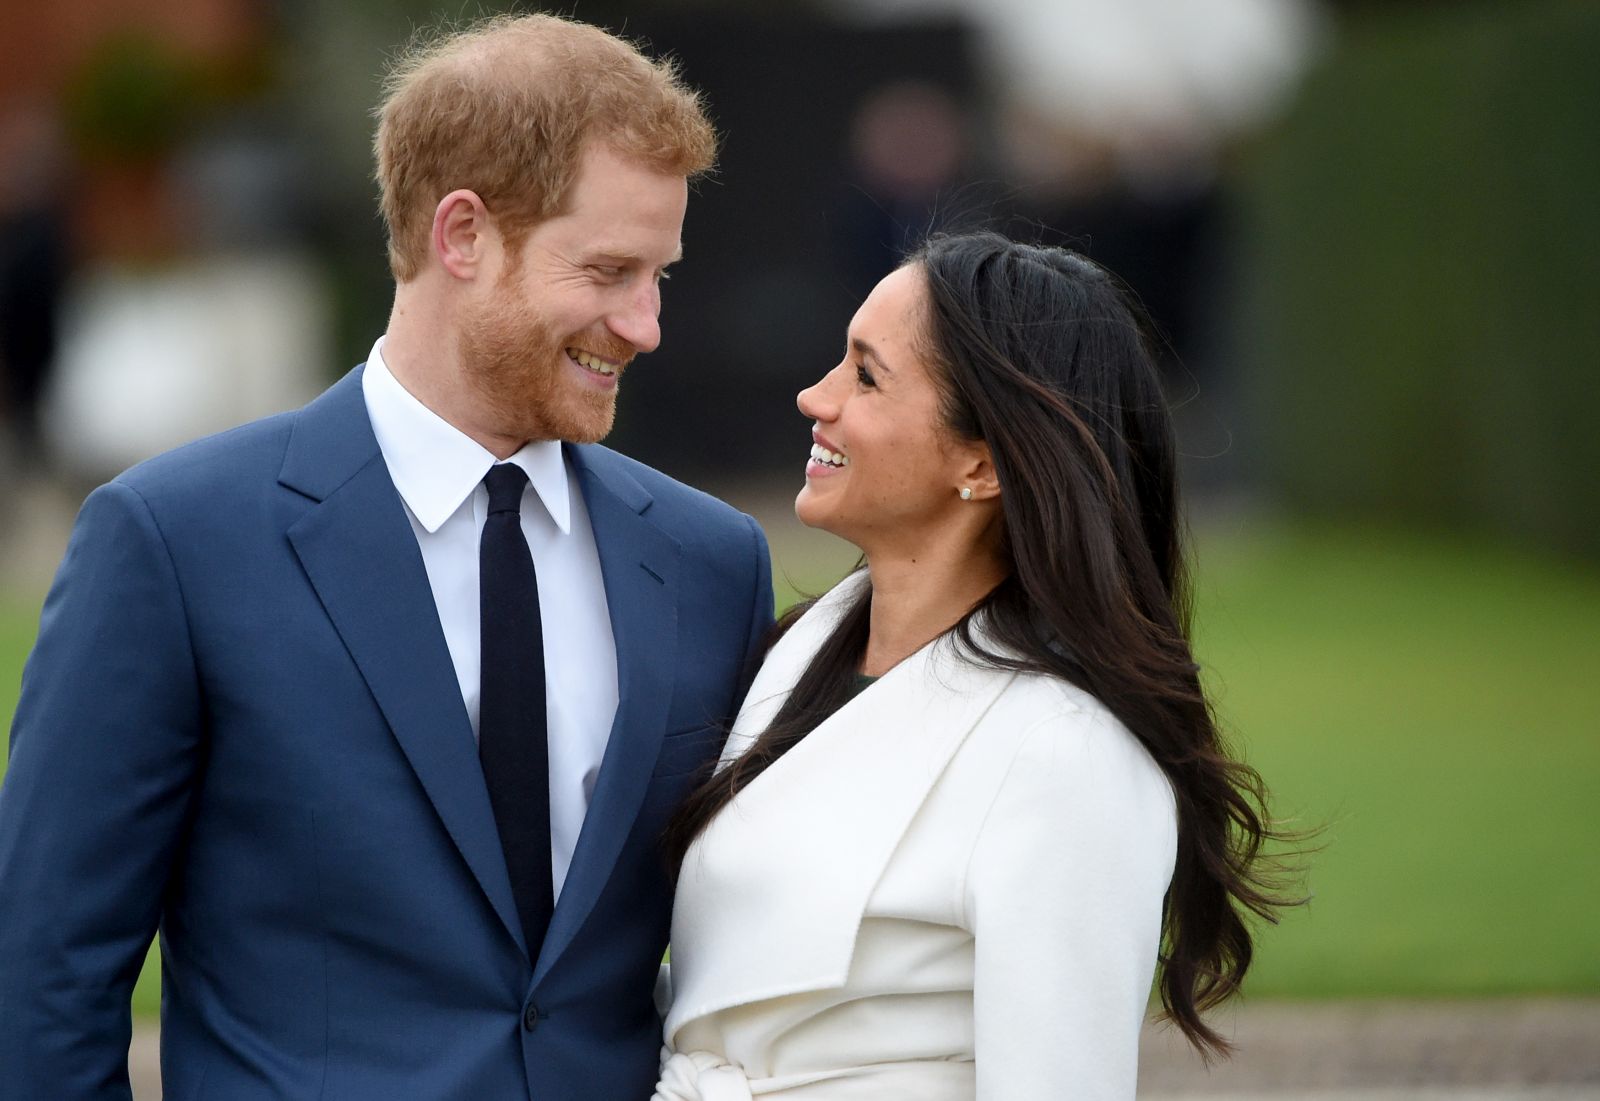 epa09023564 (FILE) - Britain's Prince Harry pose with Meghan Markle during a photocall after announcing their engagement in the Sunken Garden in Kensington Palace in London, Britain, 27 November 2017 (reissued 19 February 2021).  Buckingham Palace announced on 19 February that Harry and Meghan have confirmed to the Queen that they will not be returning as working members of the Royal Family.  EPA/FACUNDO ARRIZABALAGA *** Local Caption *** 56689949